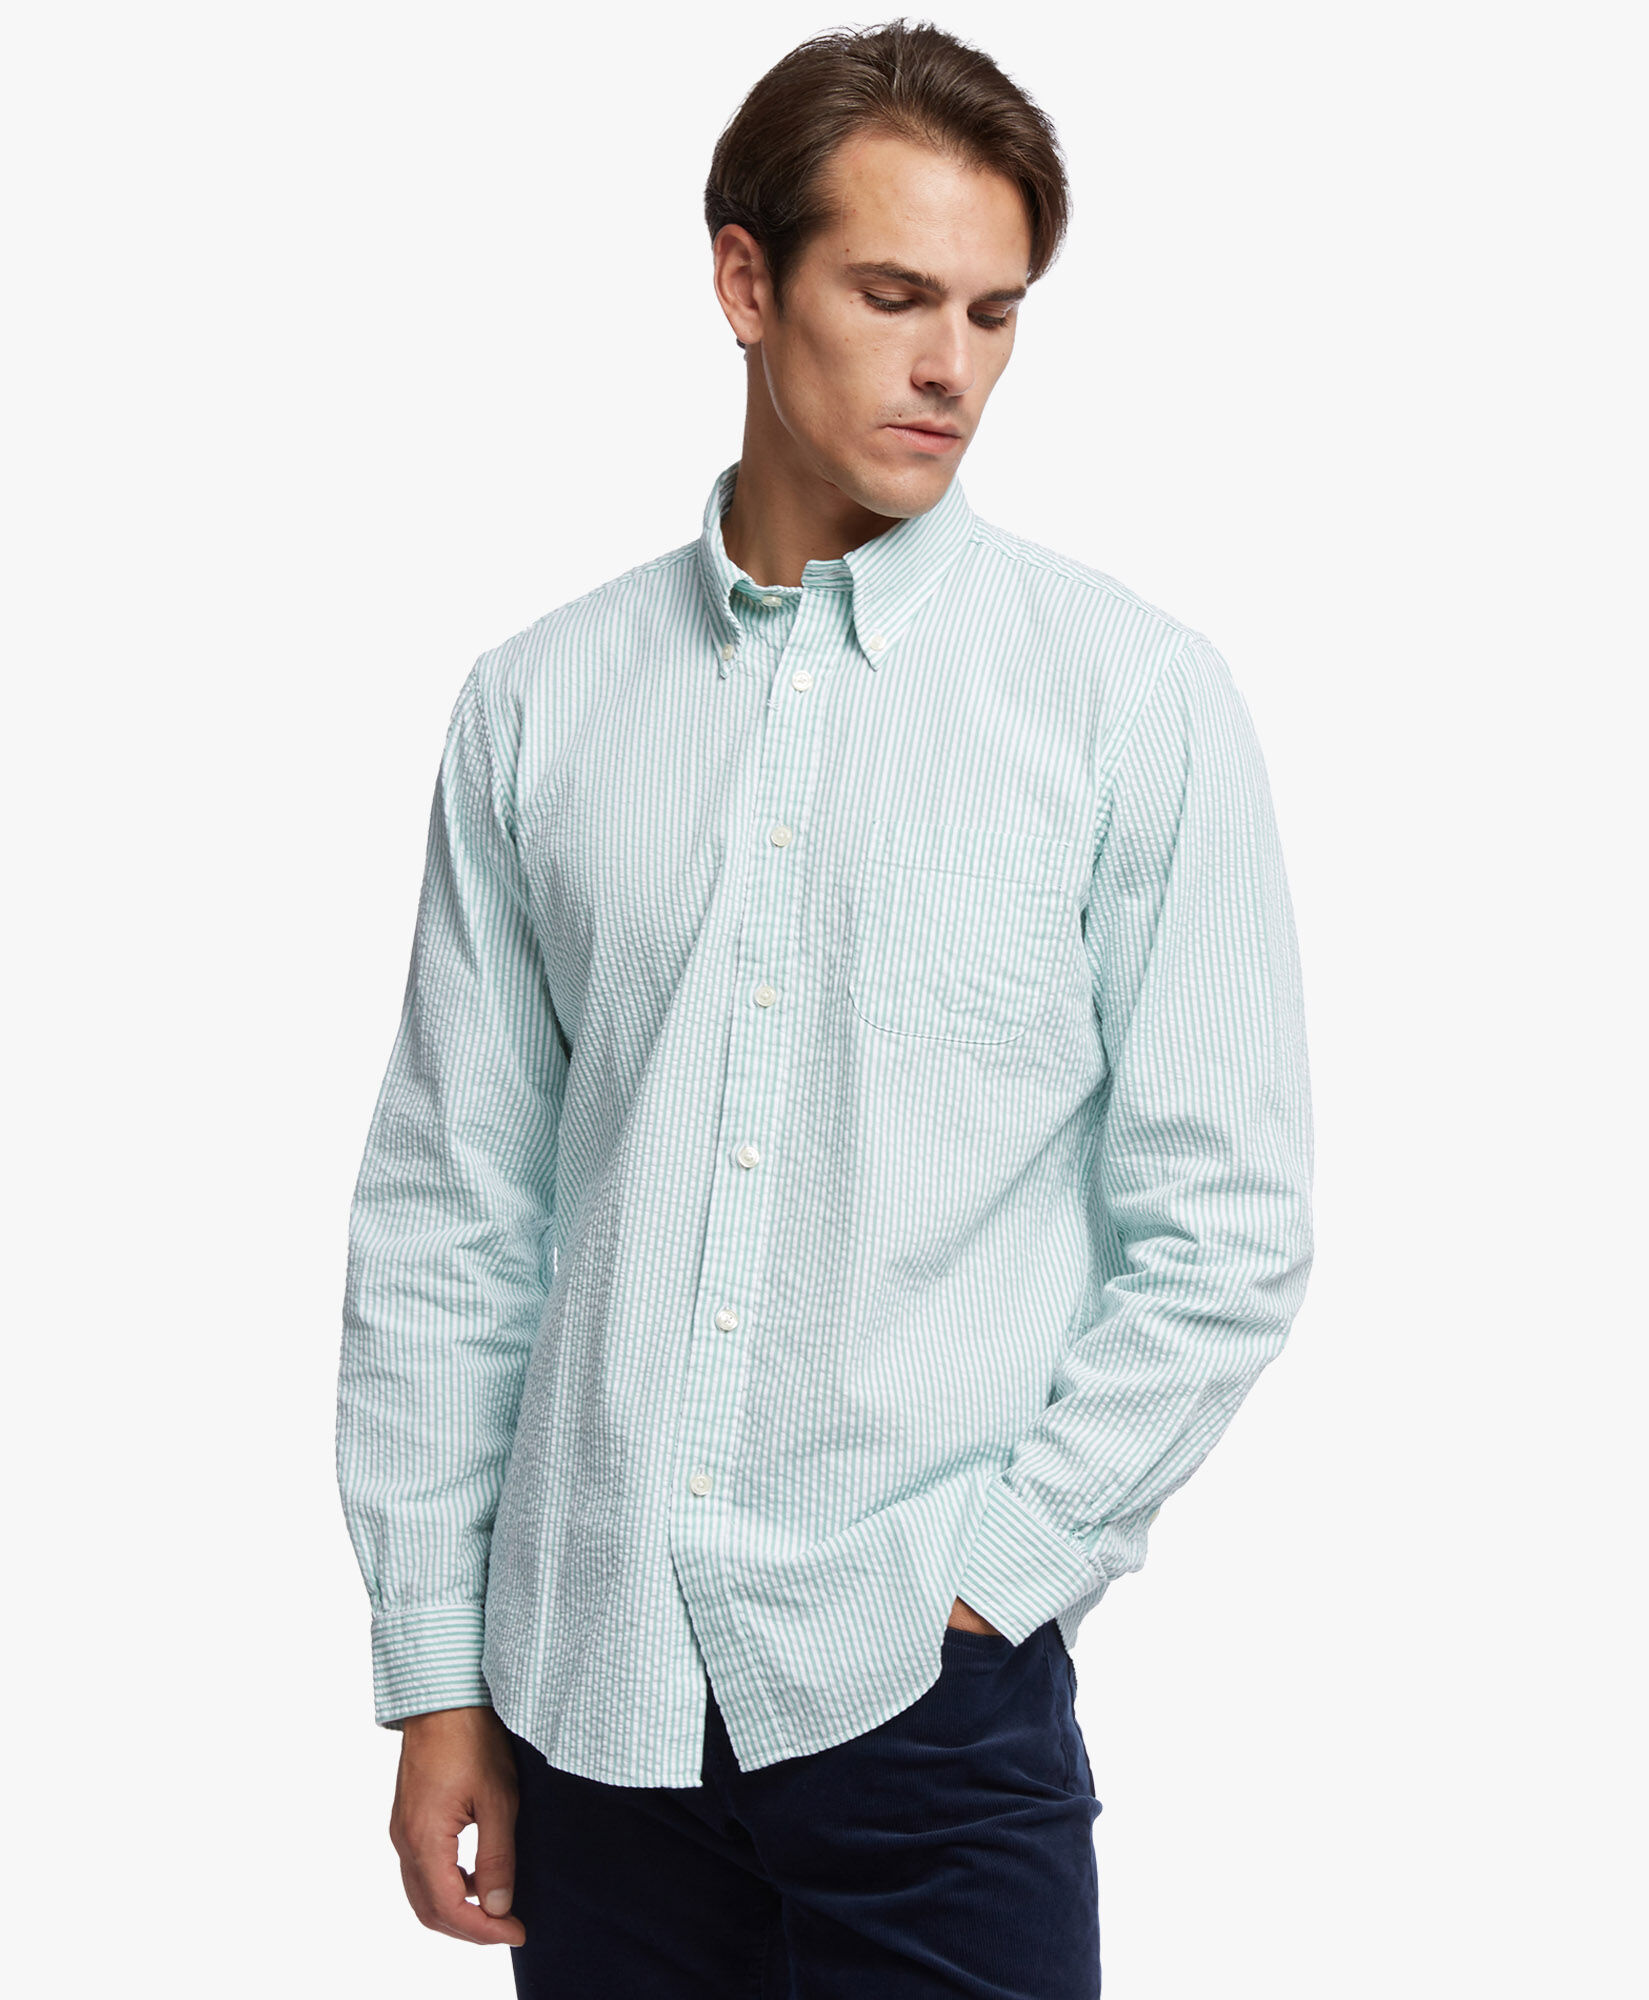 Men's Shirts: Short & Long Sleeve Button-Downs | Brooks Brothers®